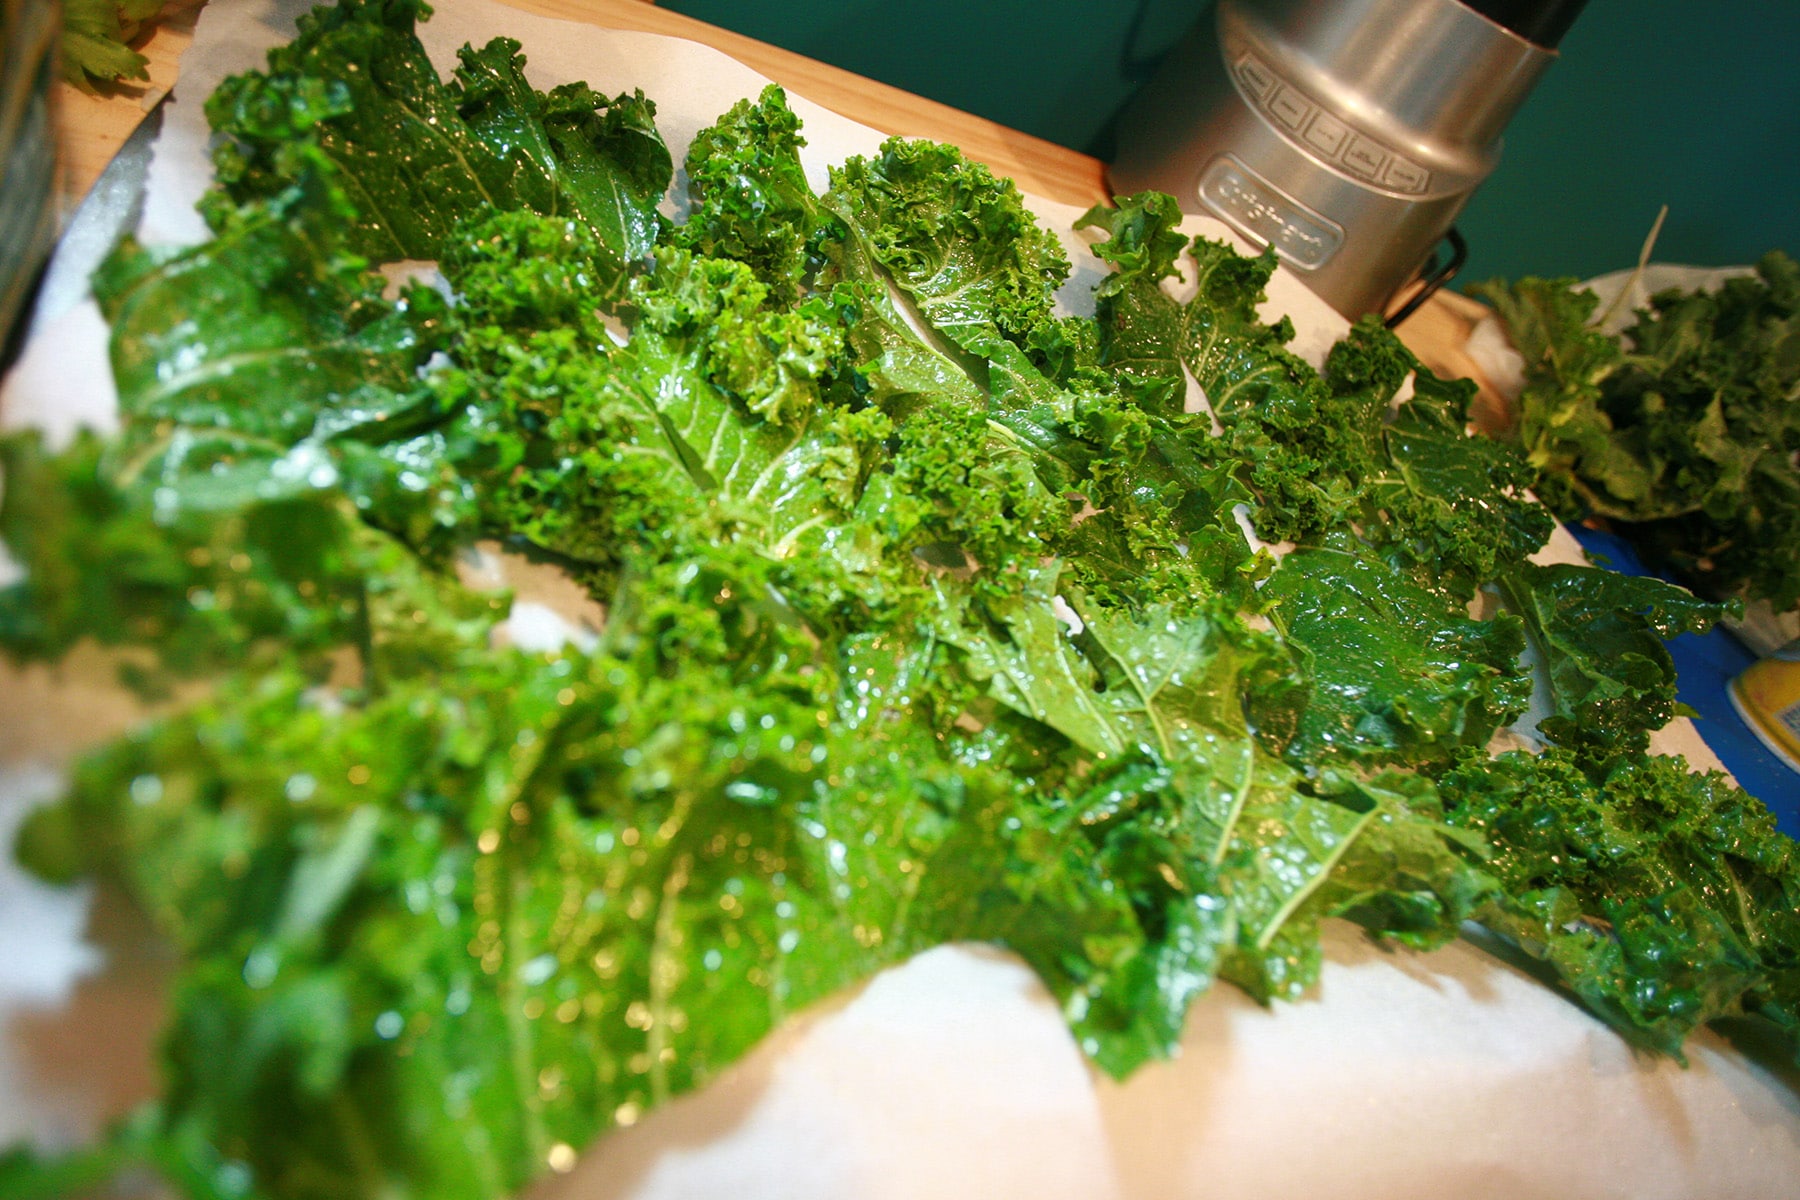 Fresh kale leaves are sperad out and coated with a small amount of oil.